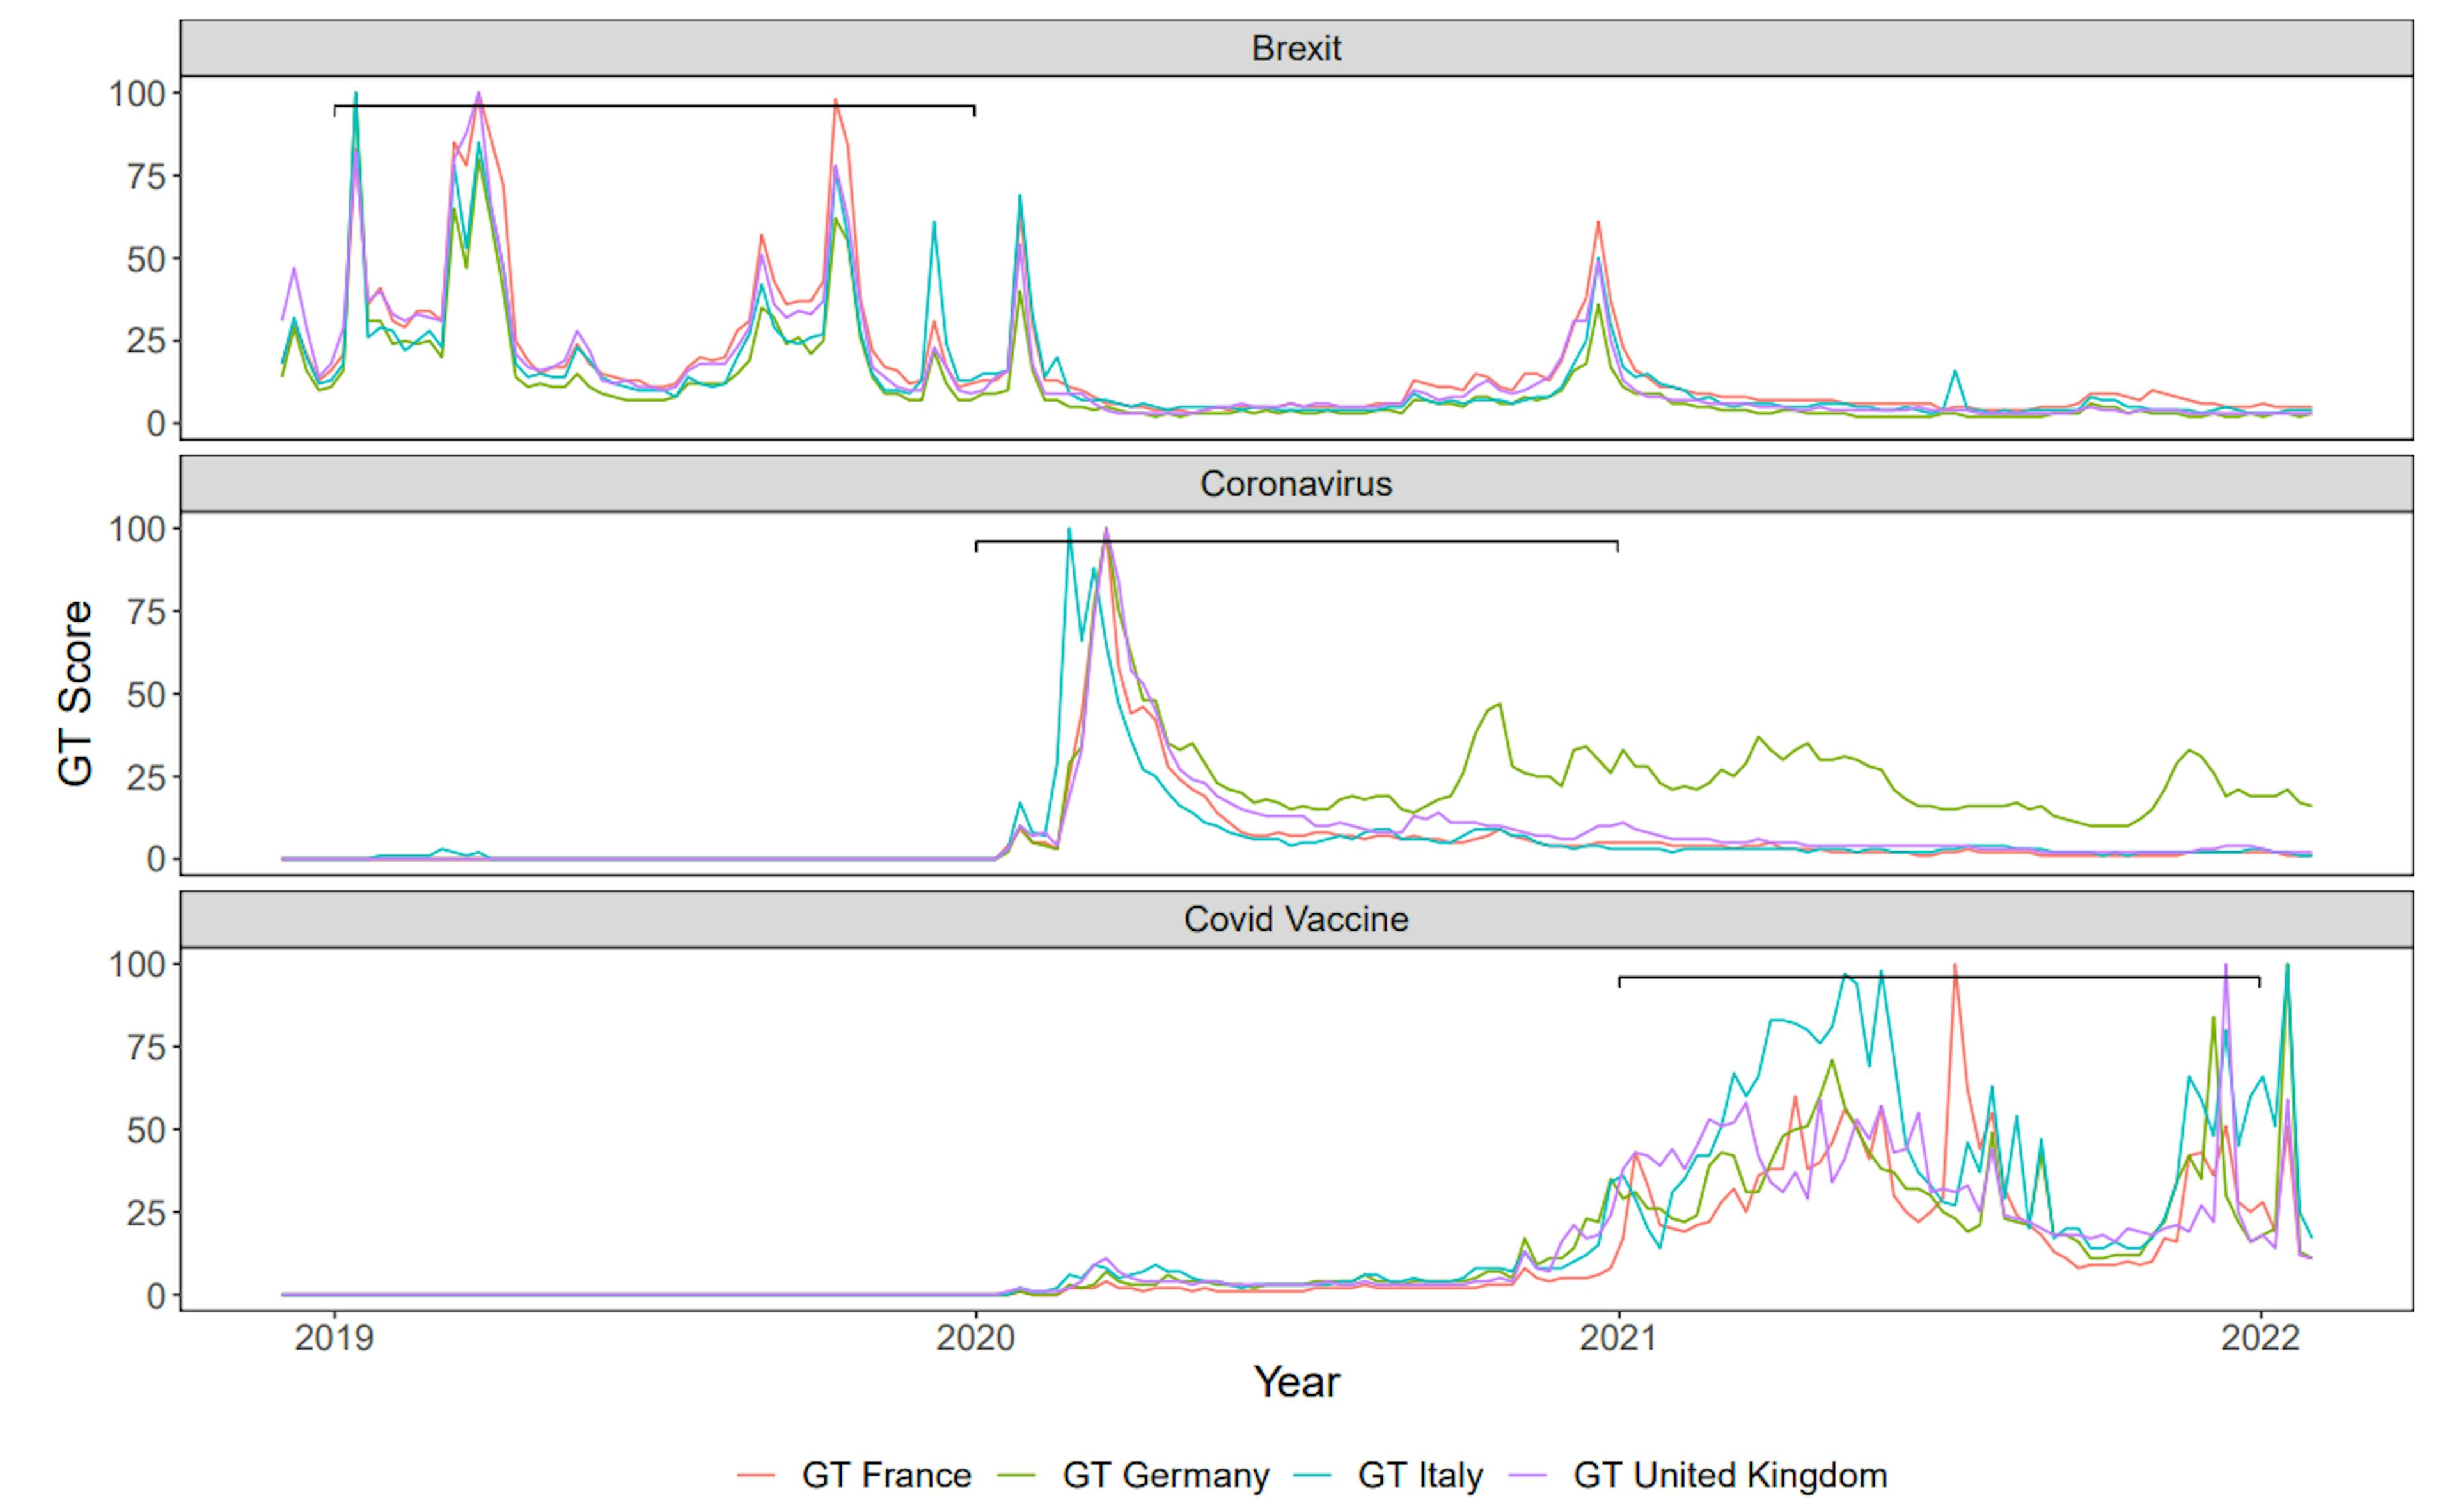 Figure 2: Google Trends analysis of search interest in Brexit, Coronavirus, and Covid Vaccine in France, Germany, Italy, and UK from 2019 to 2021. The plots display how search interest for each topic evolved over time, with each row representing one topic. Interest trends reveal that Brexit was most popular in 2019, followed by a sharp decline in 2020 and 2021 with some exceptions at the end of 2020. Coronavirus peaked in early 2020 and declined thereafter, while Covid Vaccine gained momentum in early 2021, reached the maximum in mid-2021, and saw another surge at the end of 2021. Brackets represent the time span taken into account in the analysis for each topic.